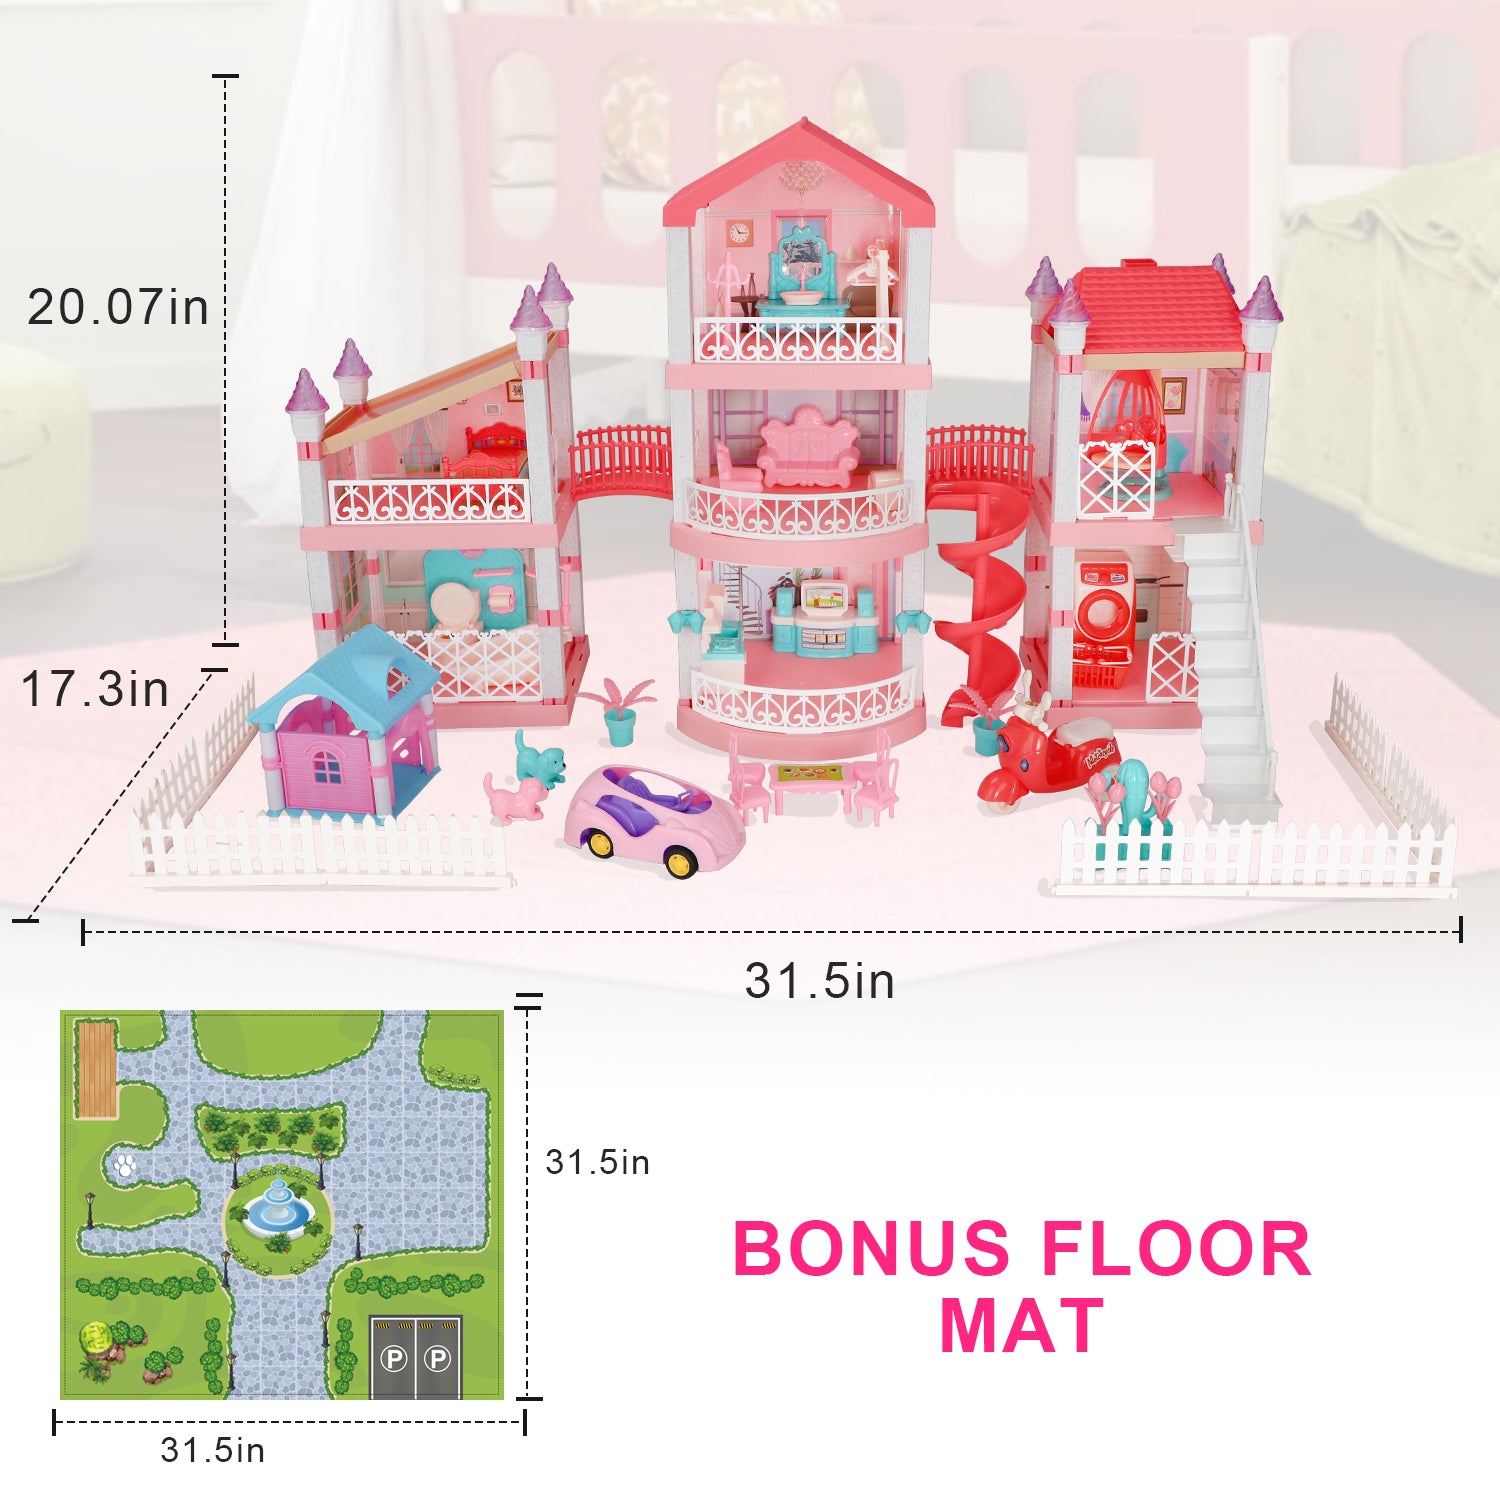 TOY Life Blue Princess Doll House Doll House 3-5 Year Old Girls Doll House  Furniture Dream House Toy for Girls Kids Two Floor Dollhouse, Baby Doll